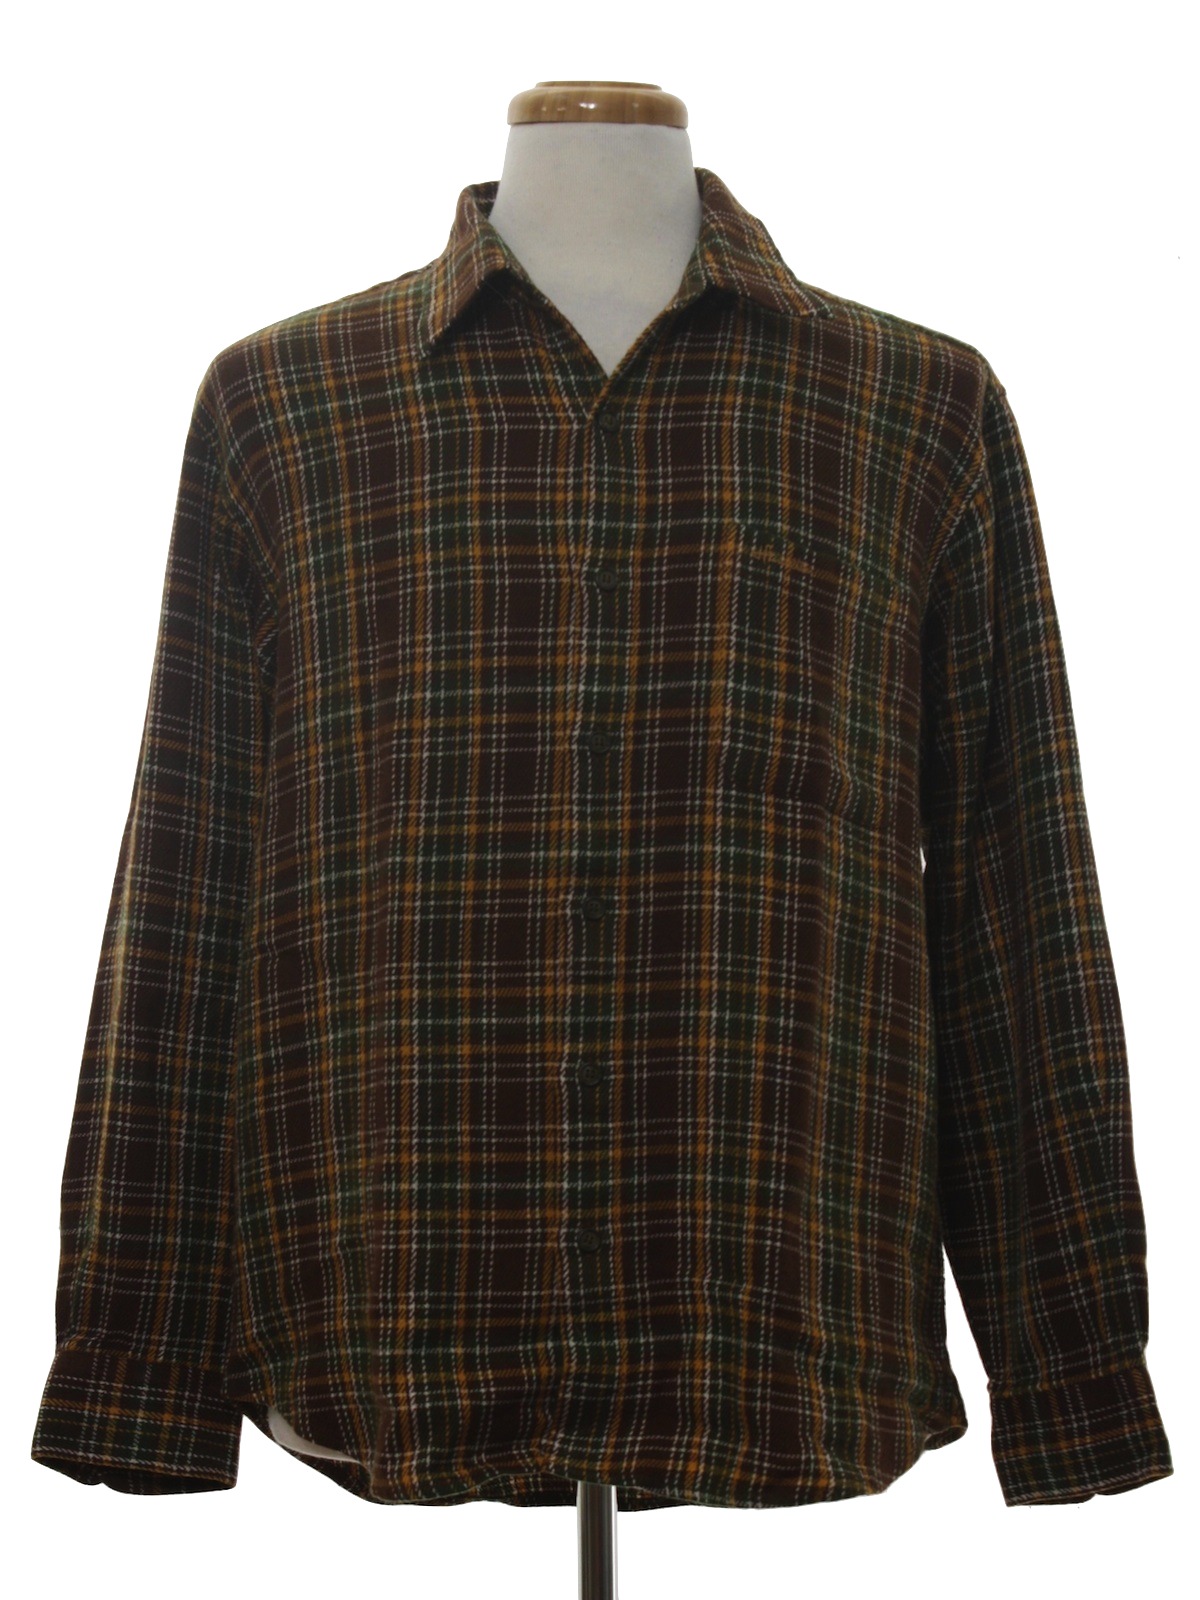 Retro 1970's Shirt: Late 70s or Early 80s -no label- Mens dark brown ...